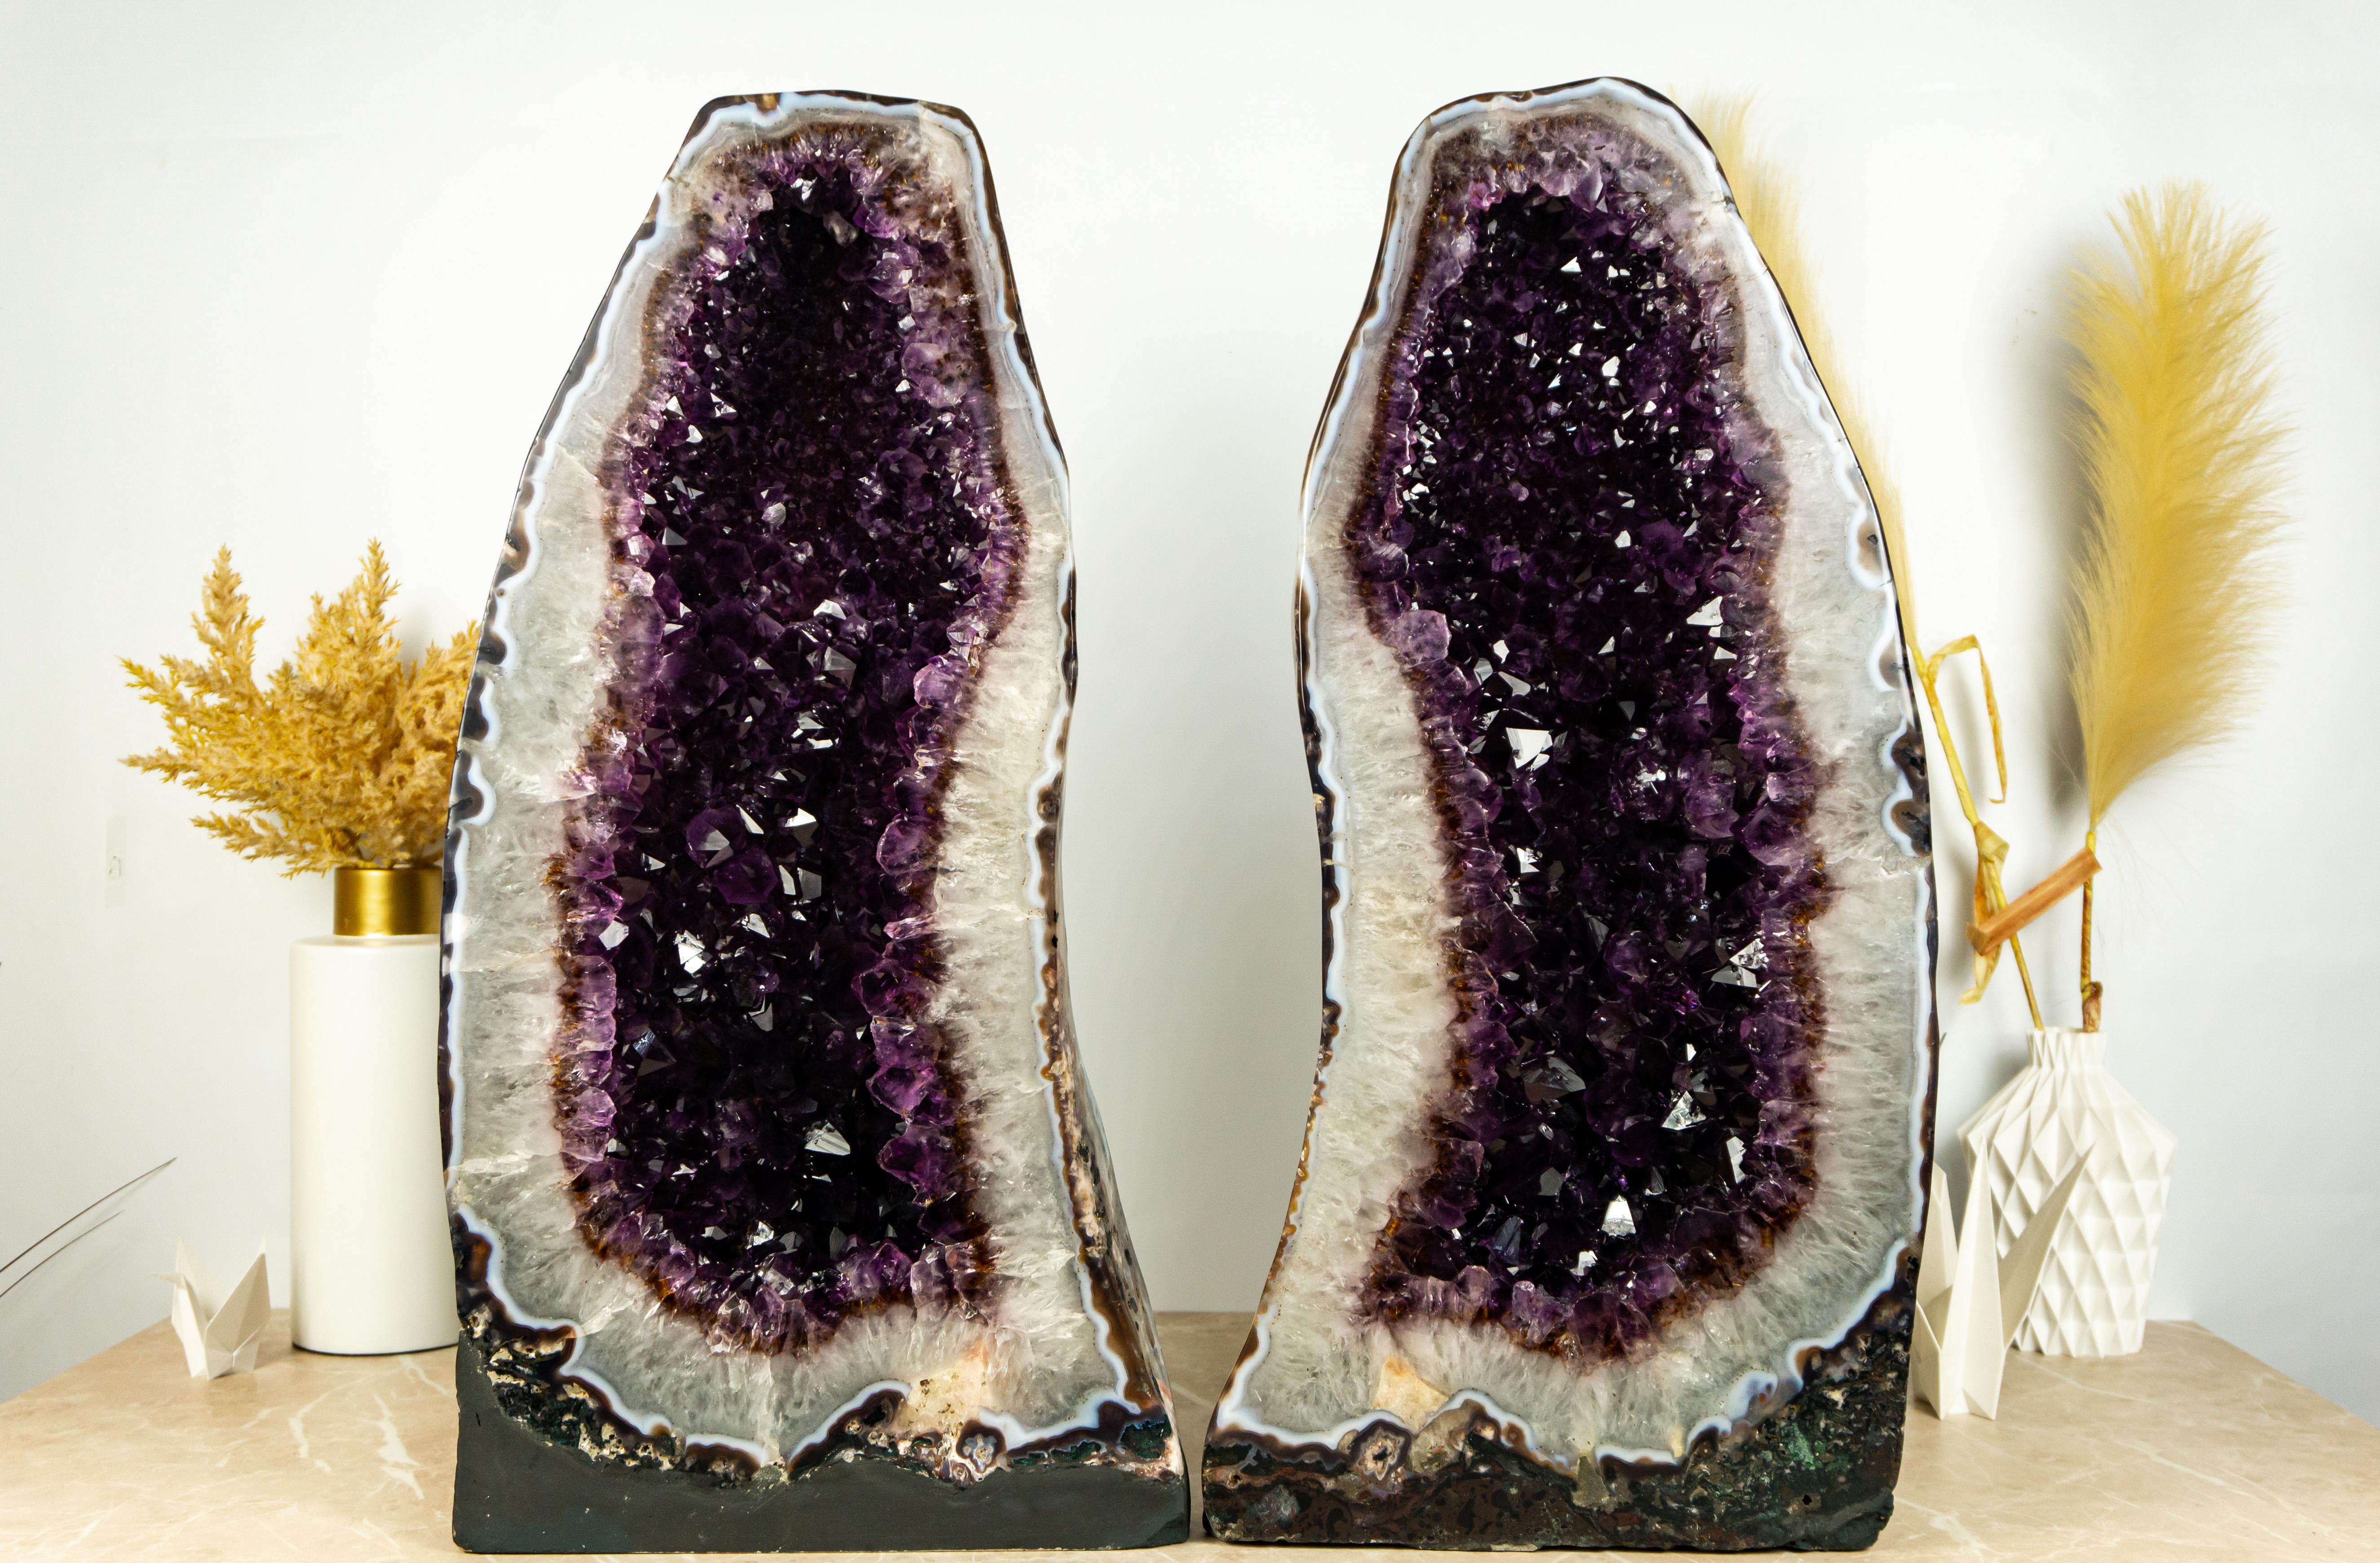 Rare in many ways, this pair of Amethyst geodes bring an aesthetically pleasing formation with its purple amethyst crystals beautifully contrasting against the white quartz, creating a stunning beauty that is further enhanced by the spread of golden